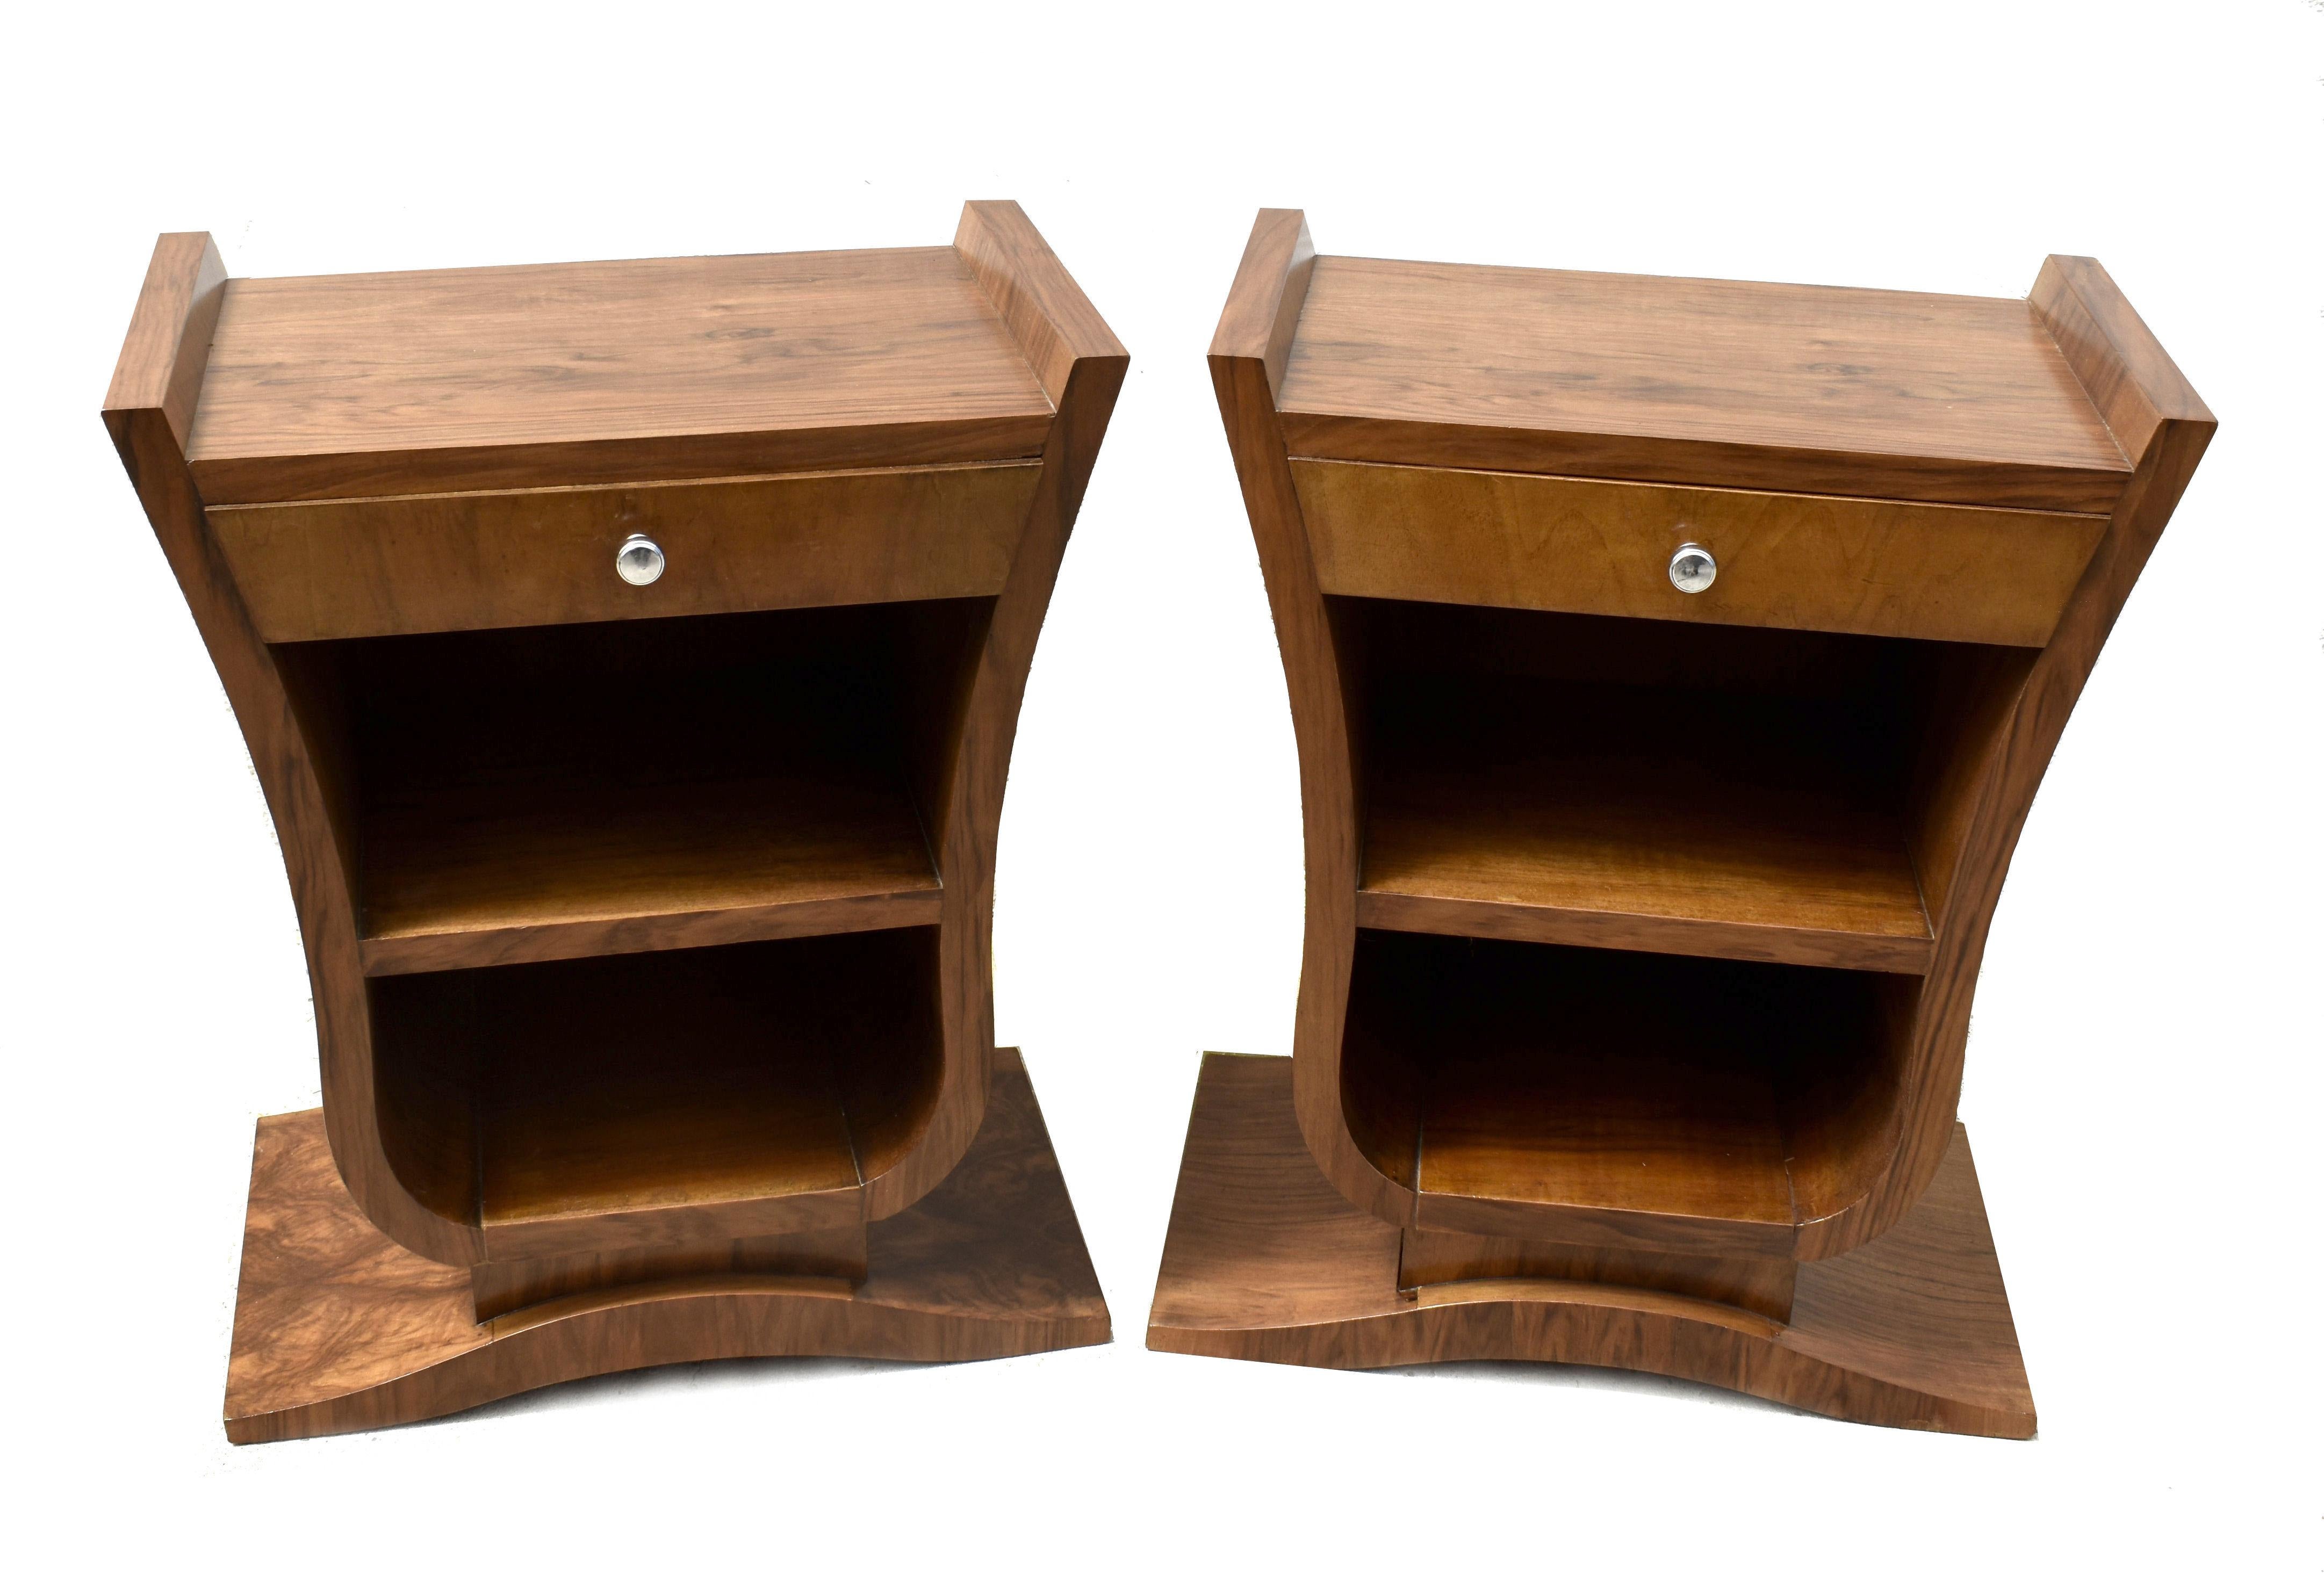 An Art Deco pair of curvaceous French bedside tables in figured walnut are up for your consideration. Made in the 1930's and originating from France these boast the very desirable u base on a triangular plinth, an iconic shape not to be mistaken for